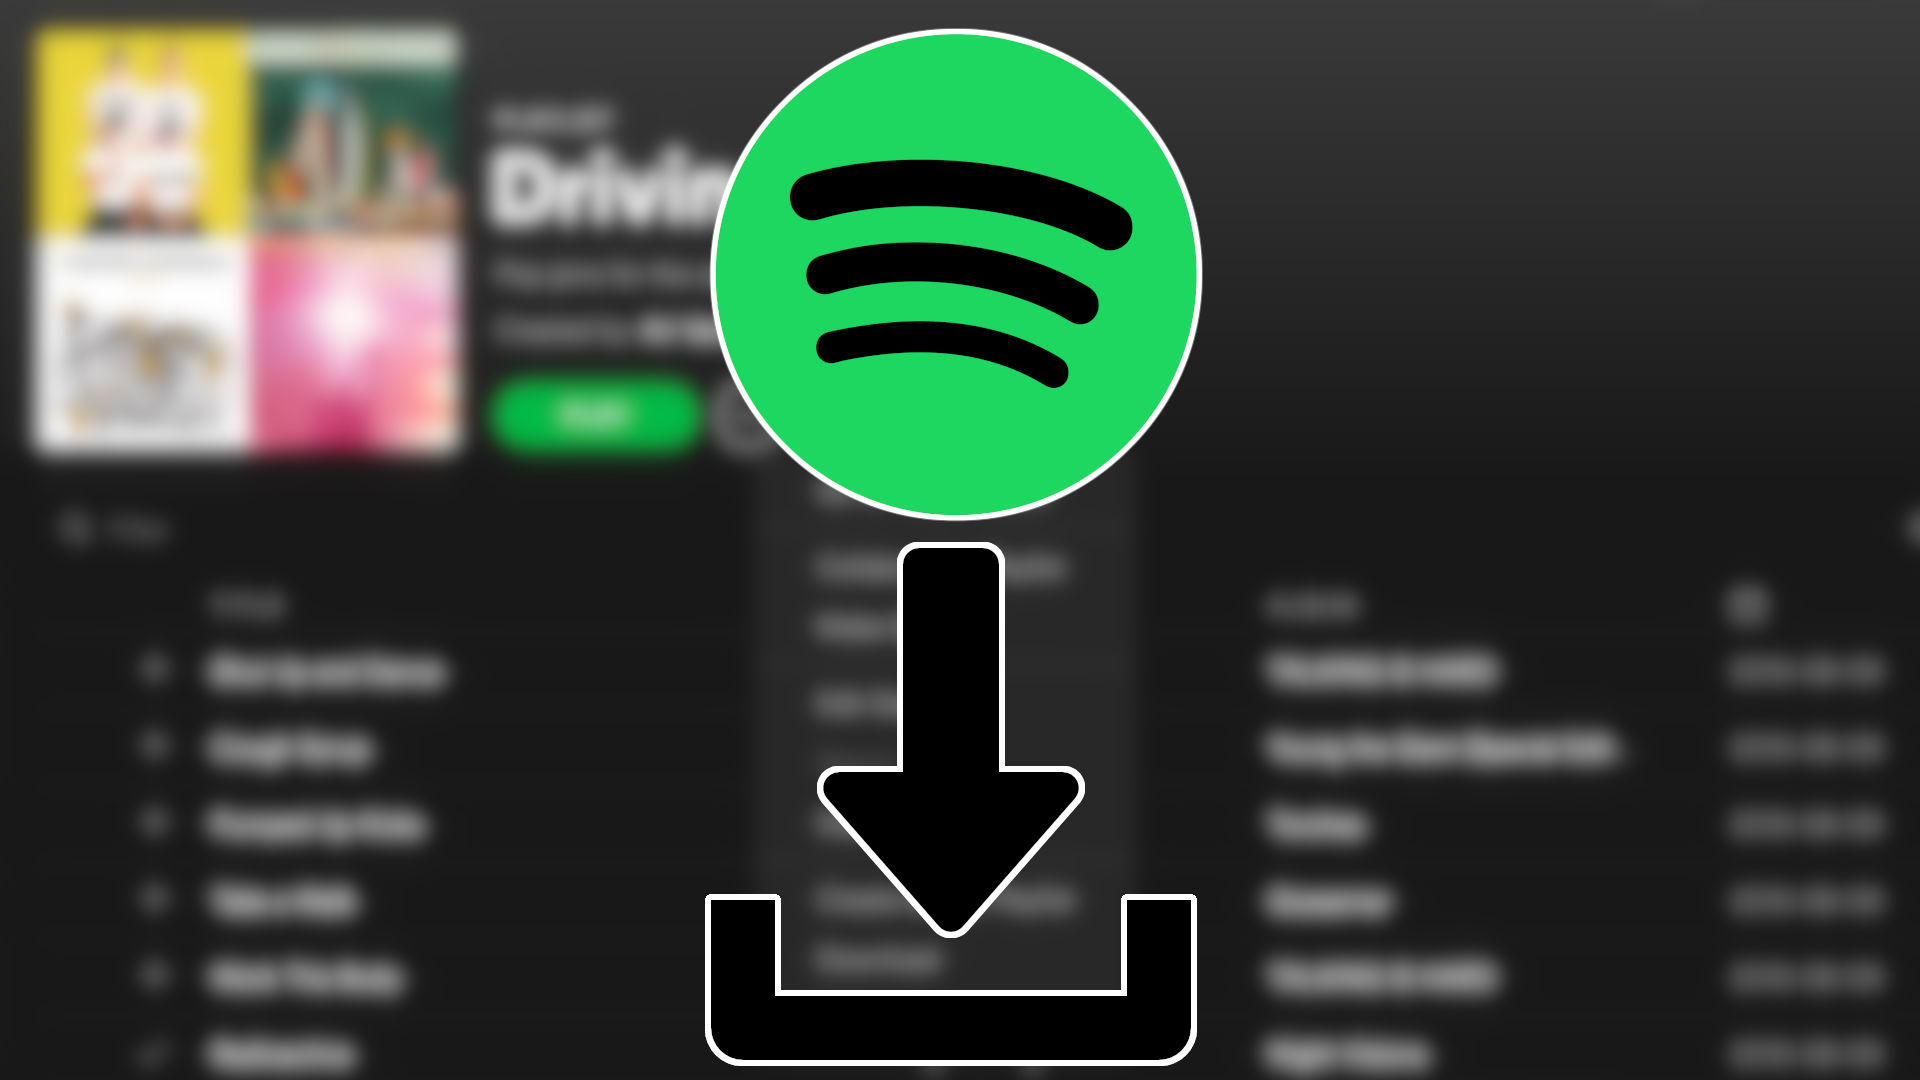 Spotify download on iOS, Android, and PC